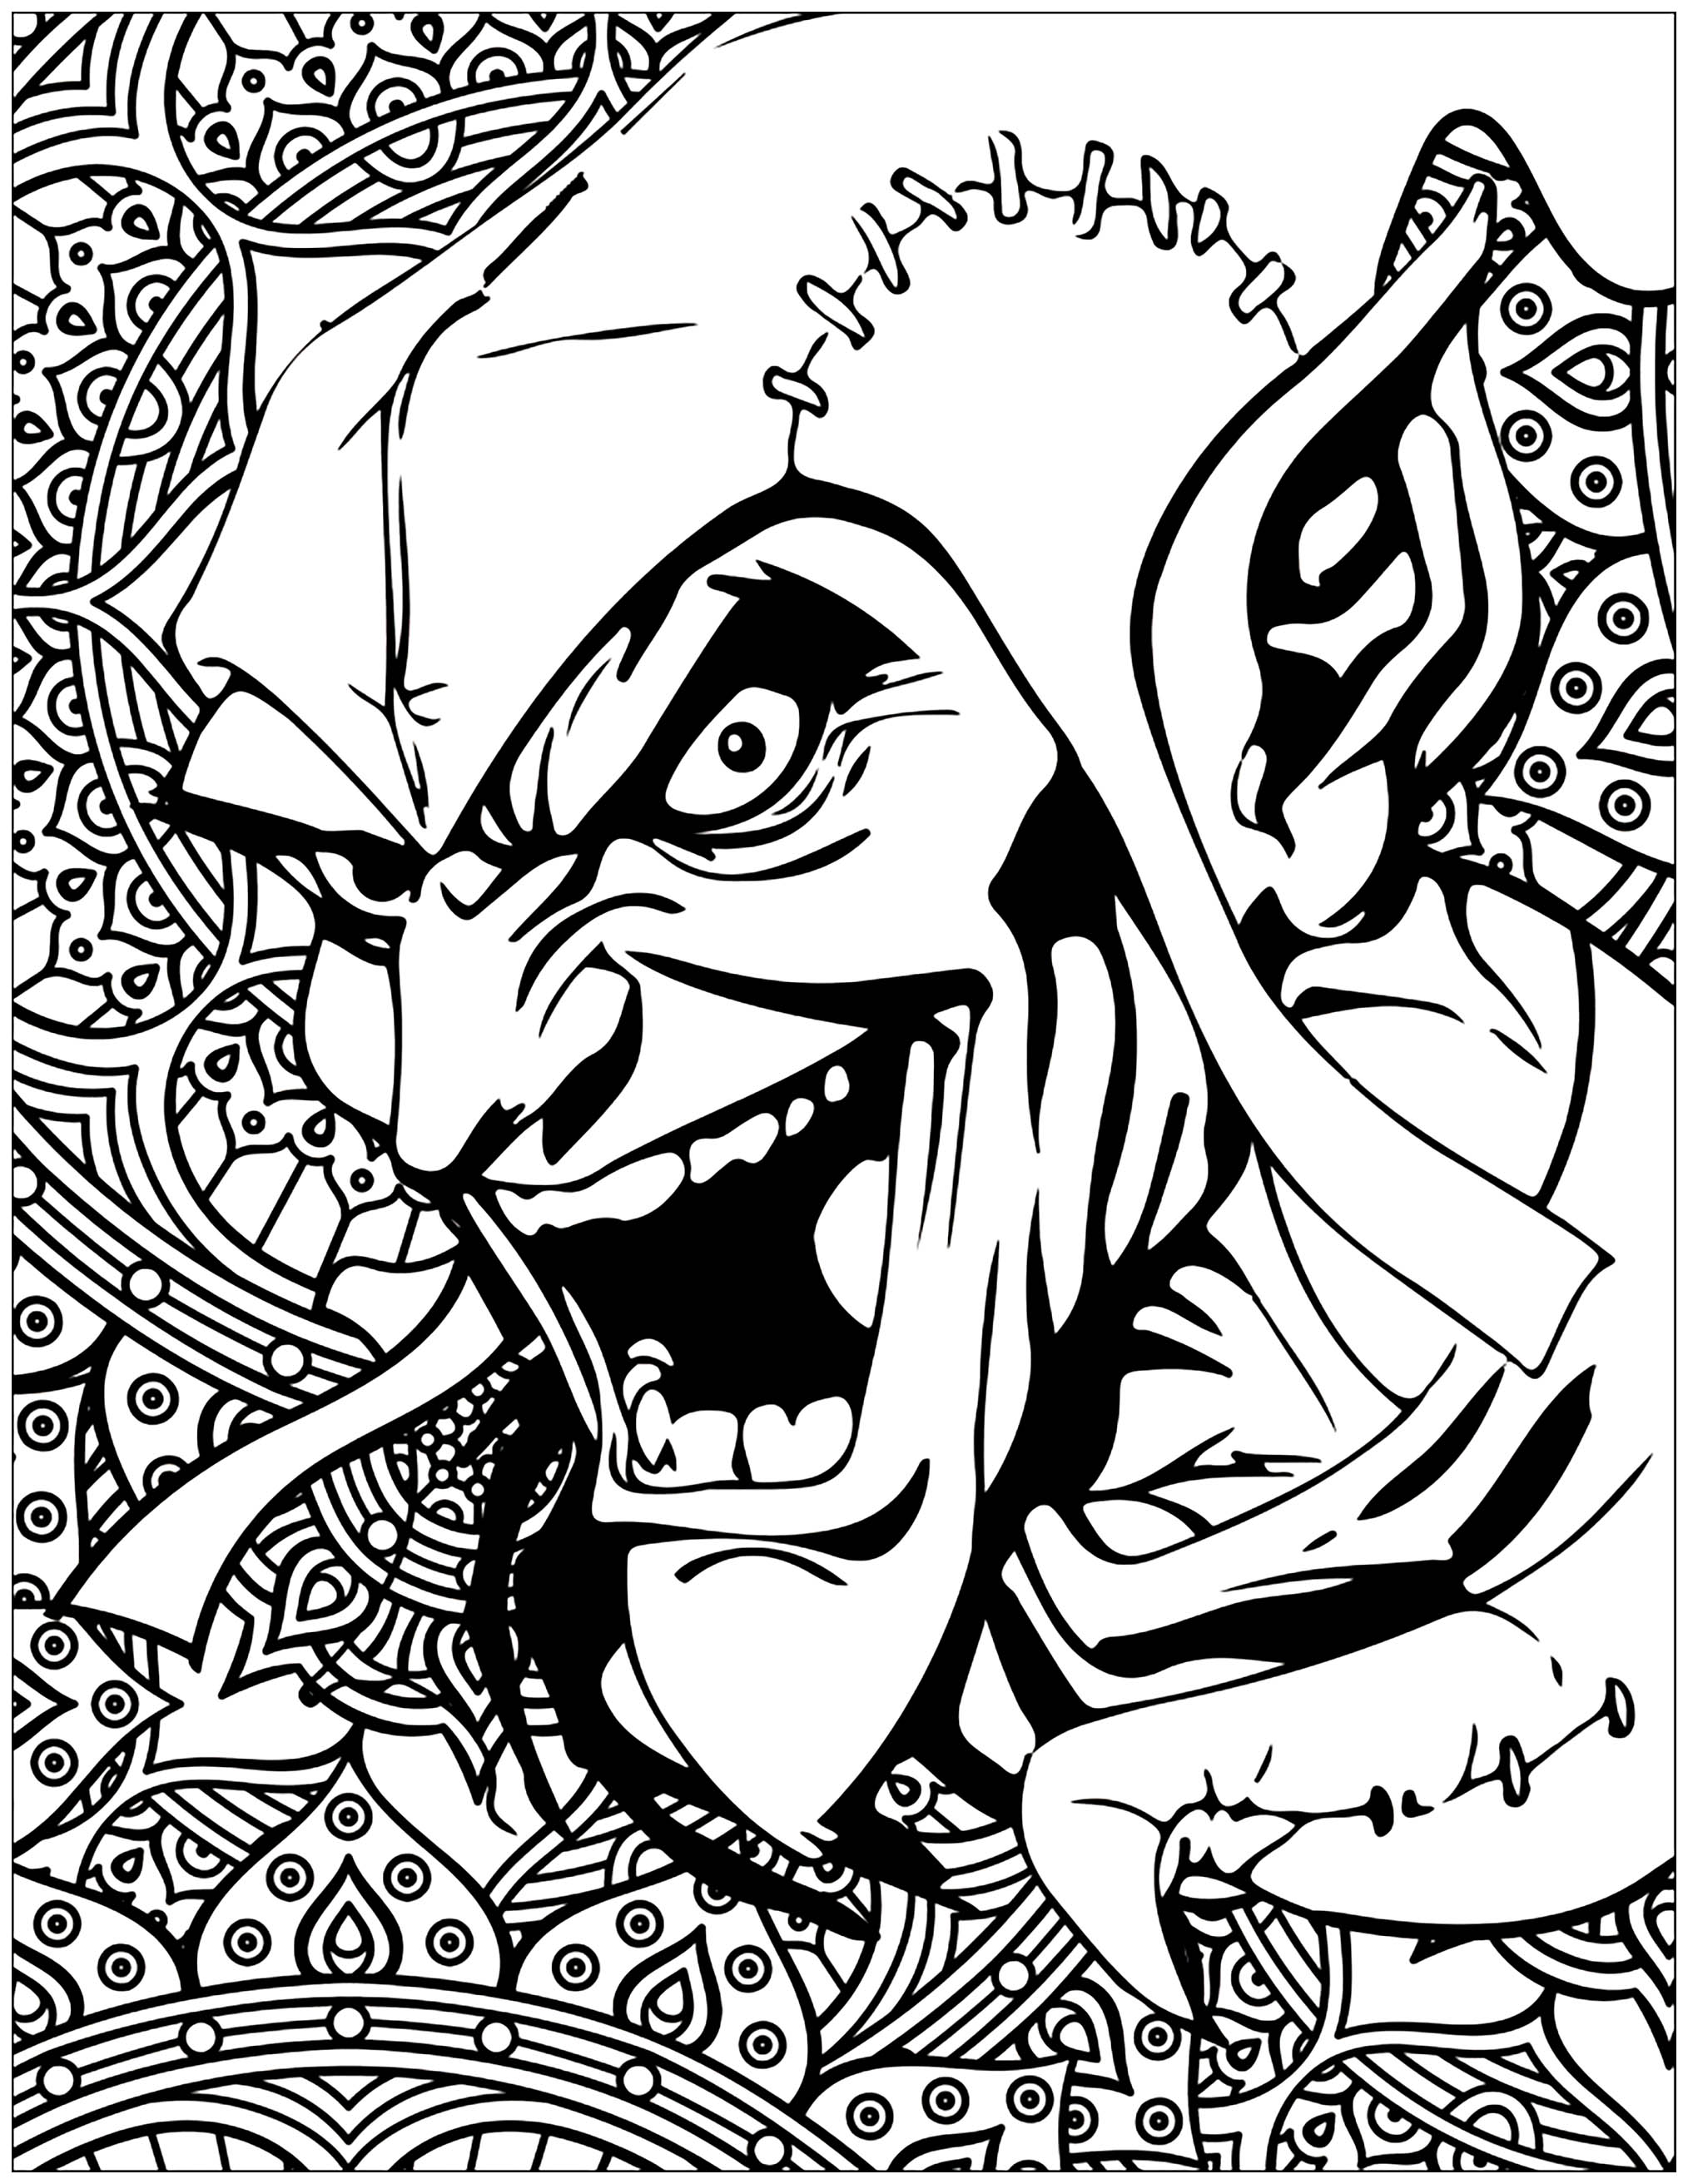 Marvel villains Green Goblin - Books Adult Coloring Pages